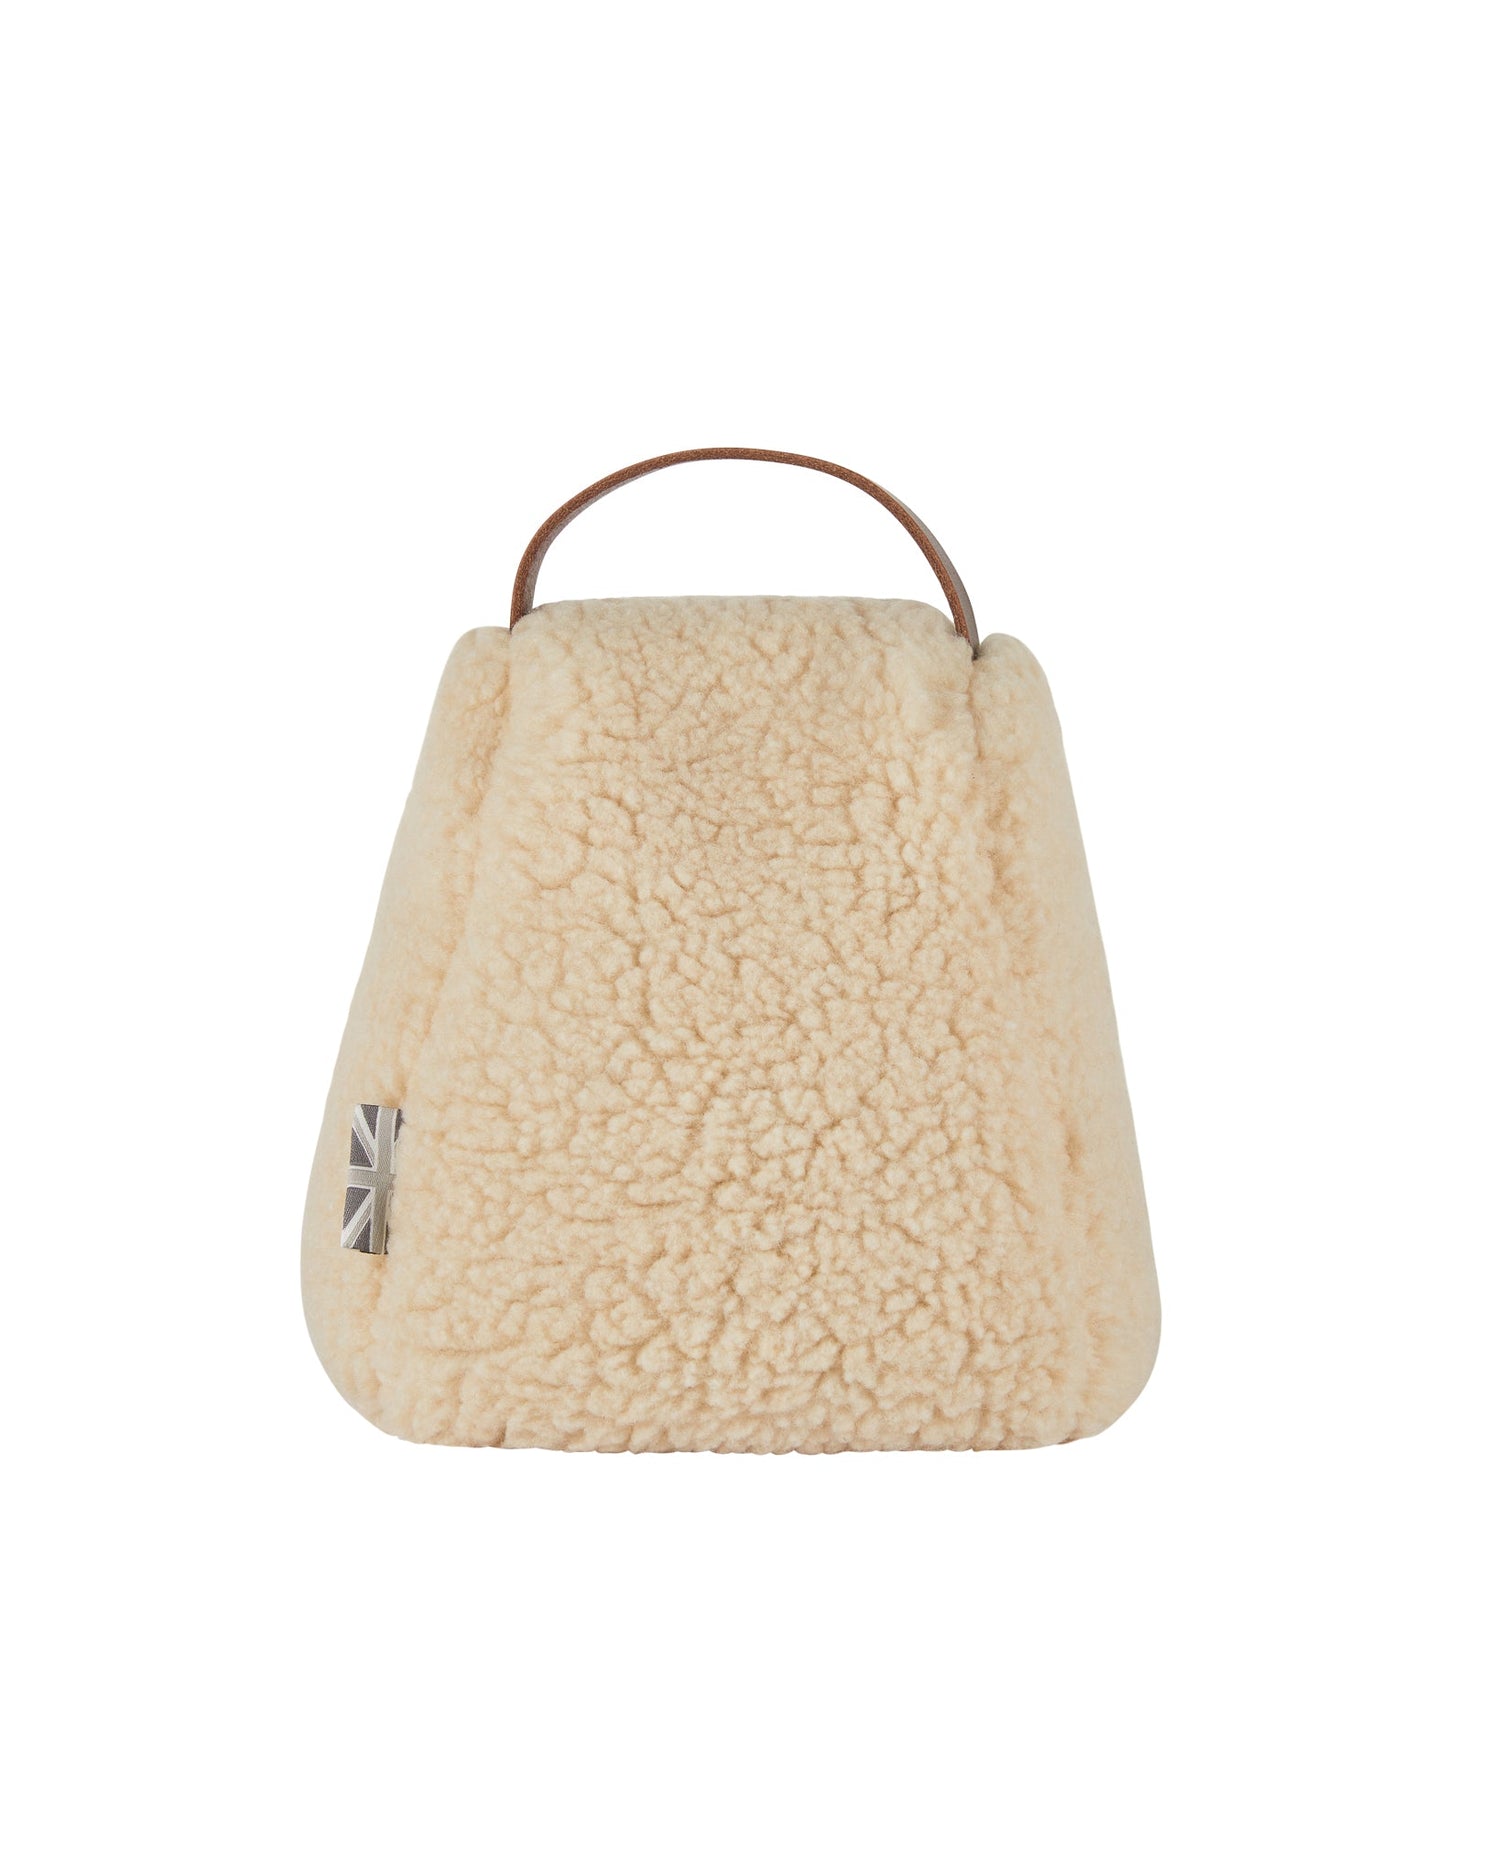 Bone sherpa doorstop by Chalk, filled with calming lavender for functional and aromatic home decor.